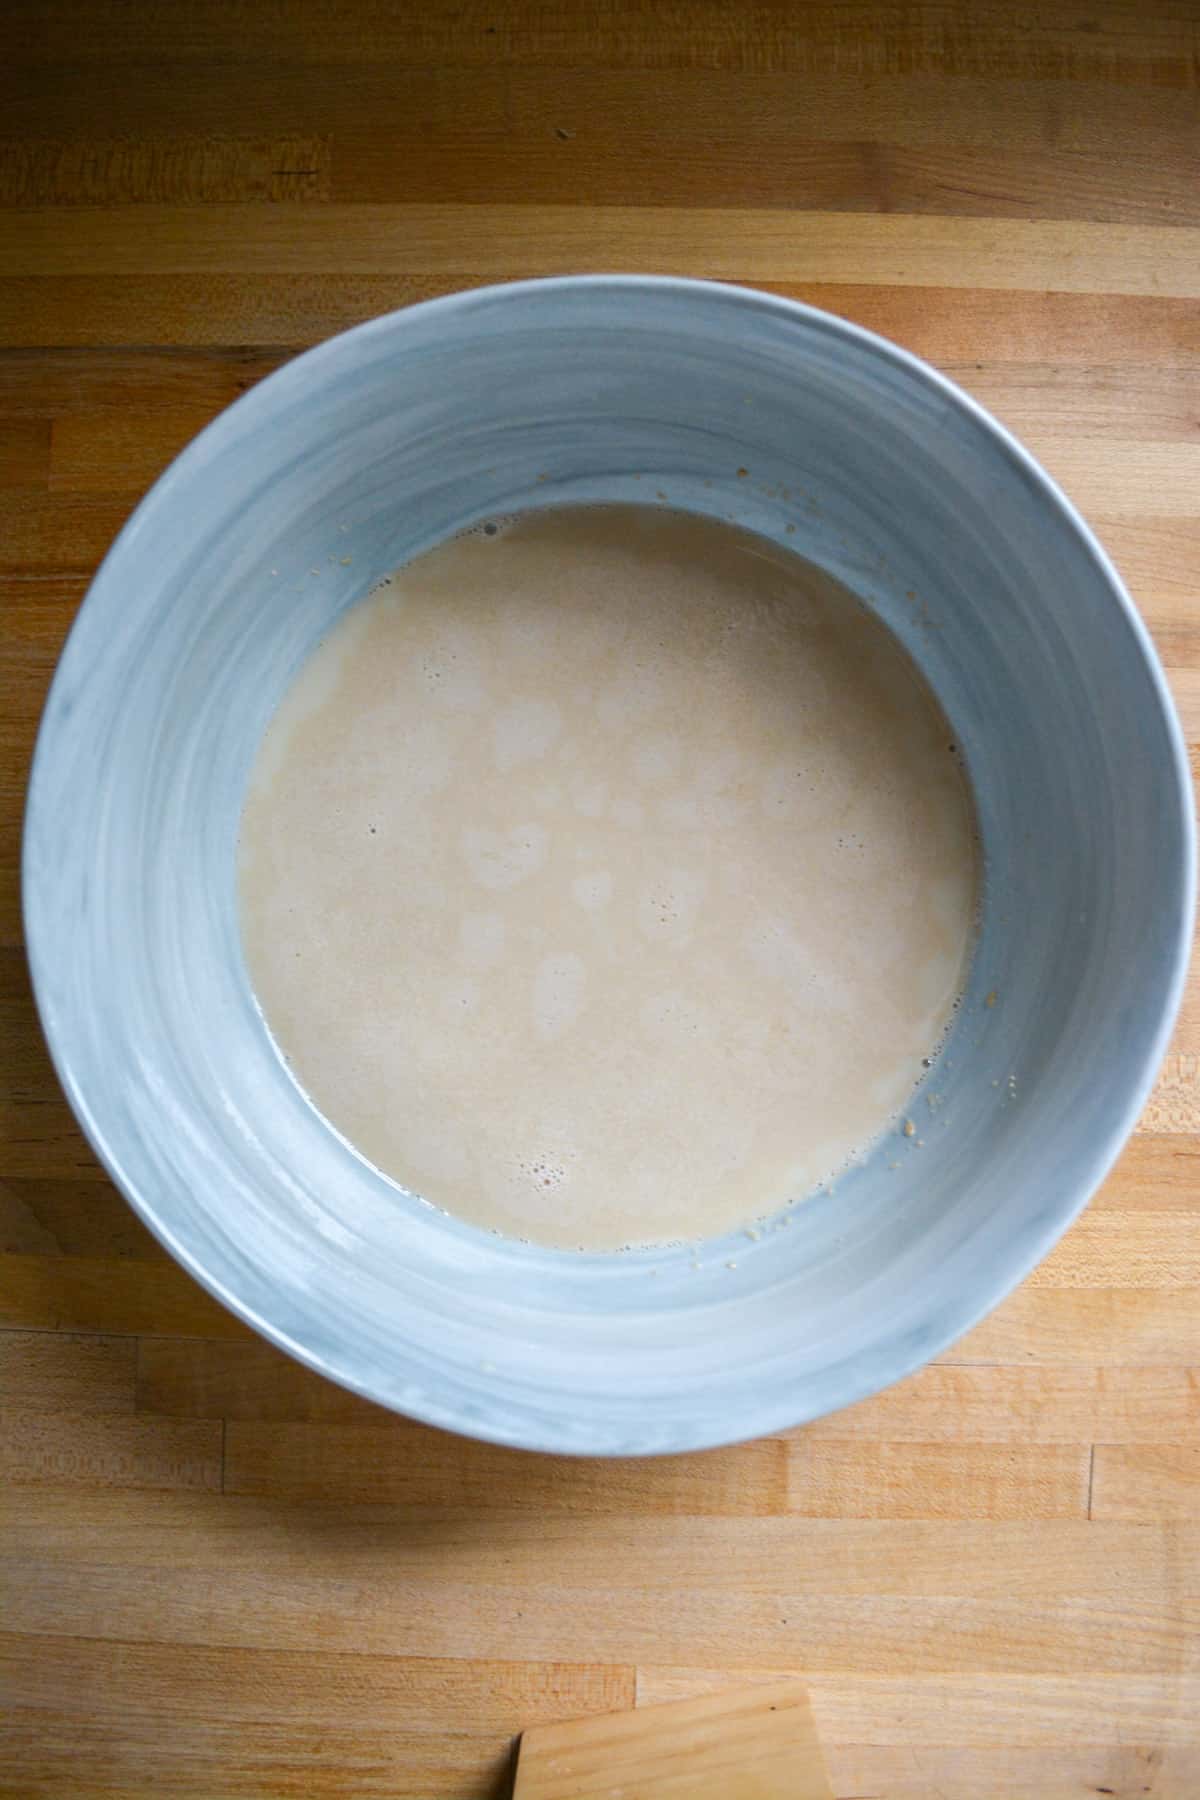 Yeast blooming in non-dairy milk in a mixing bowl.